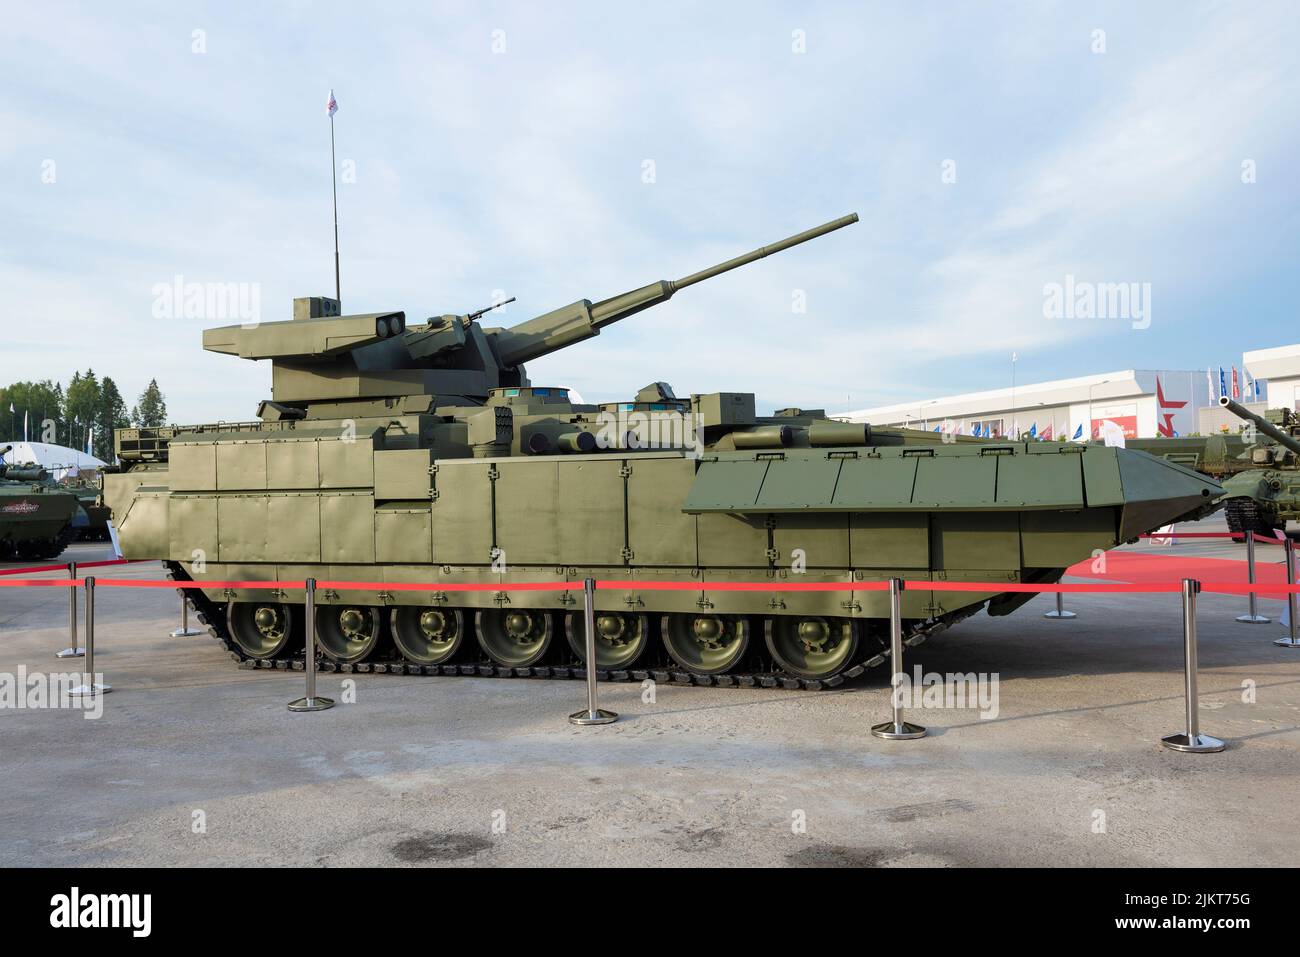 MOSCOW REGION, RUSSIA - AUGUST 25, 2020: T-15 (Object 149) is a promising Russian armored fighting vehicle based on the Armata universal tracked platf Stock Photo